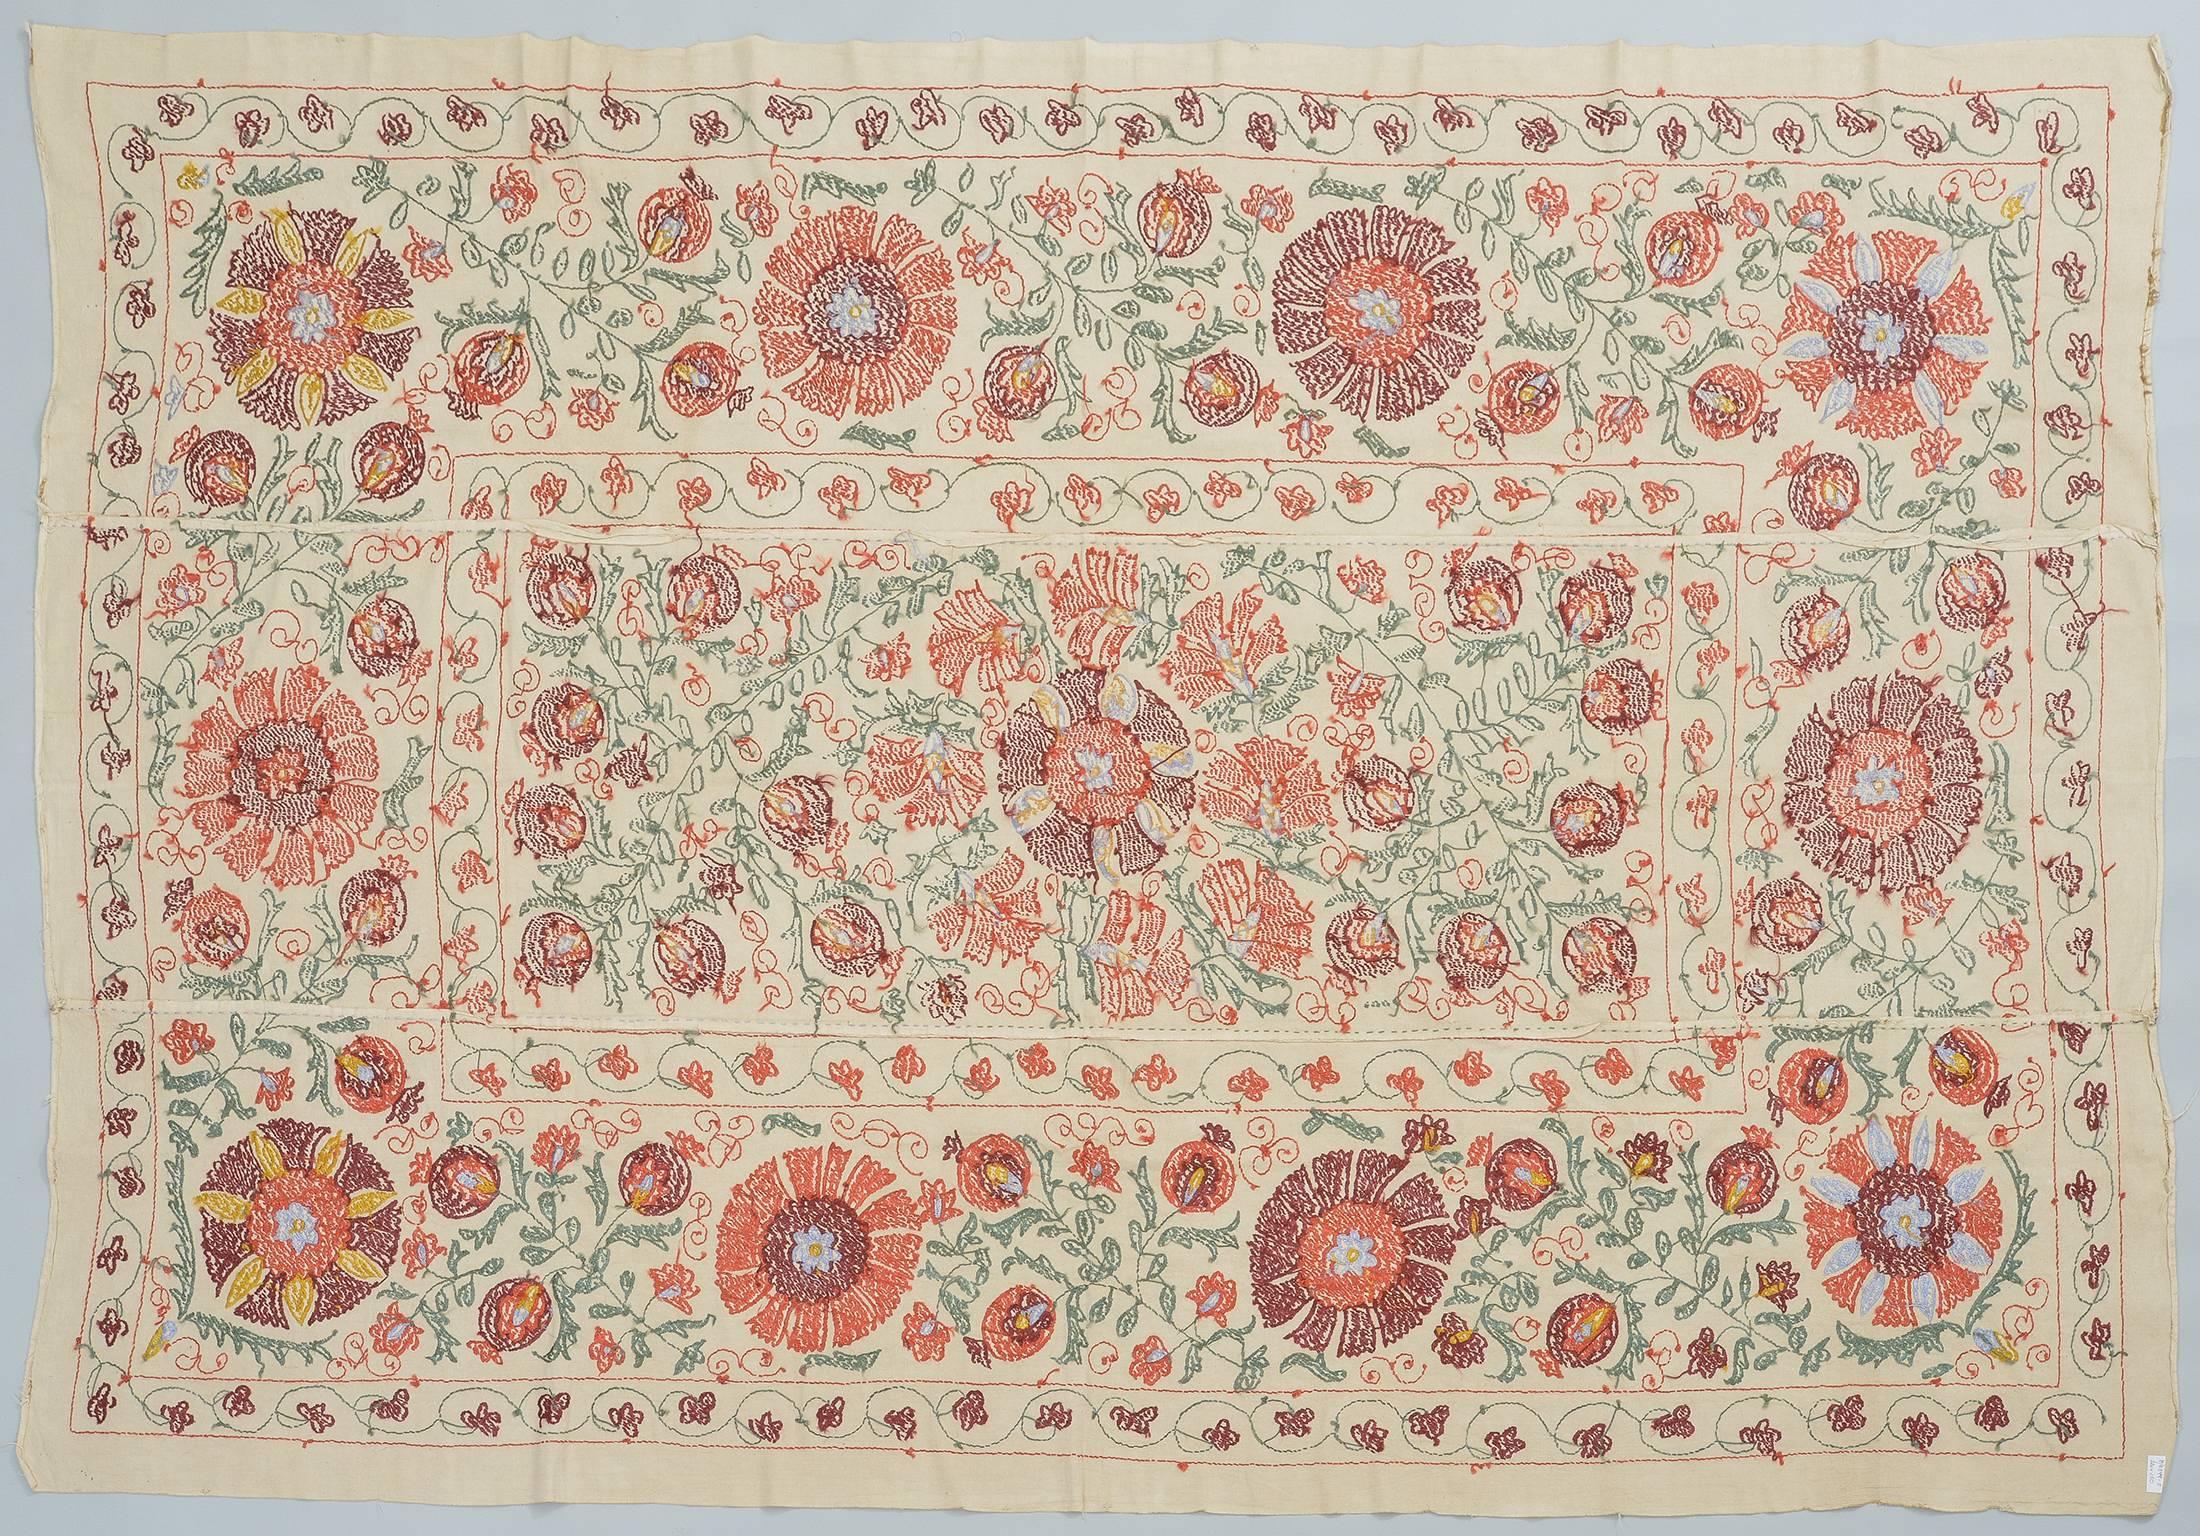 Very amazing silk embroidery on a very fine fabric like silk, from Turkmenistan tribes - with Pomegranates -
B/2399-5.